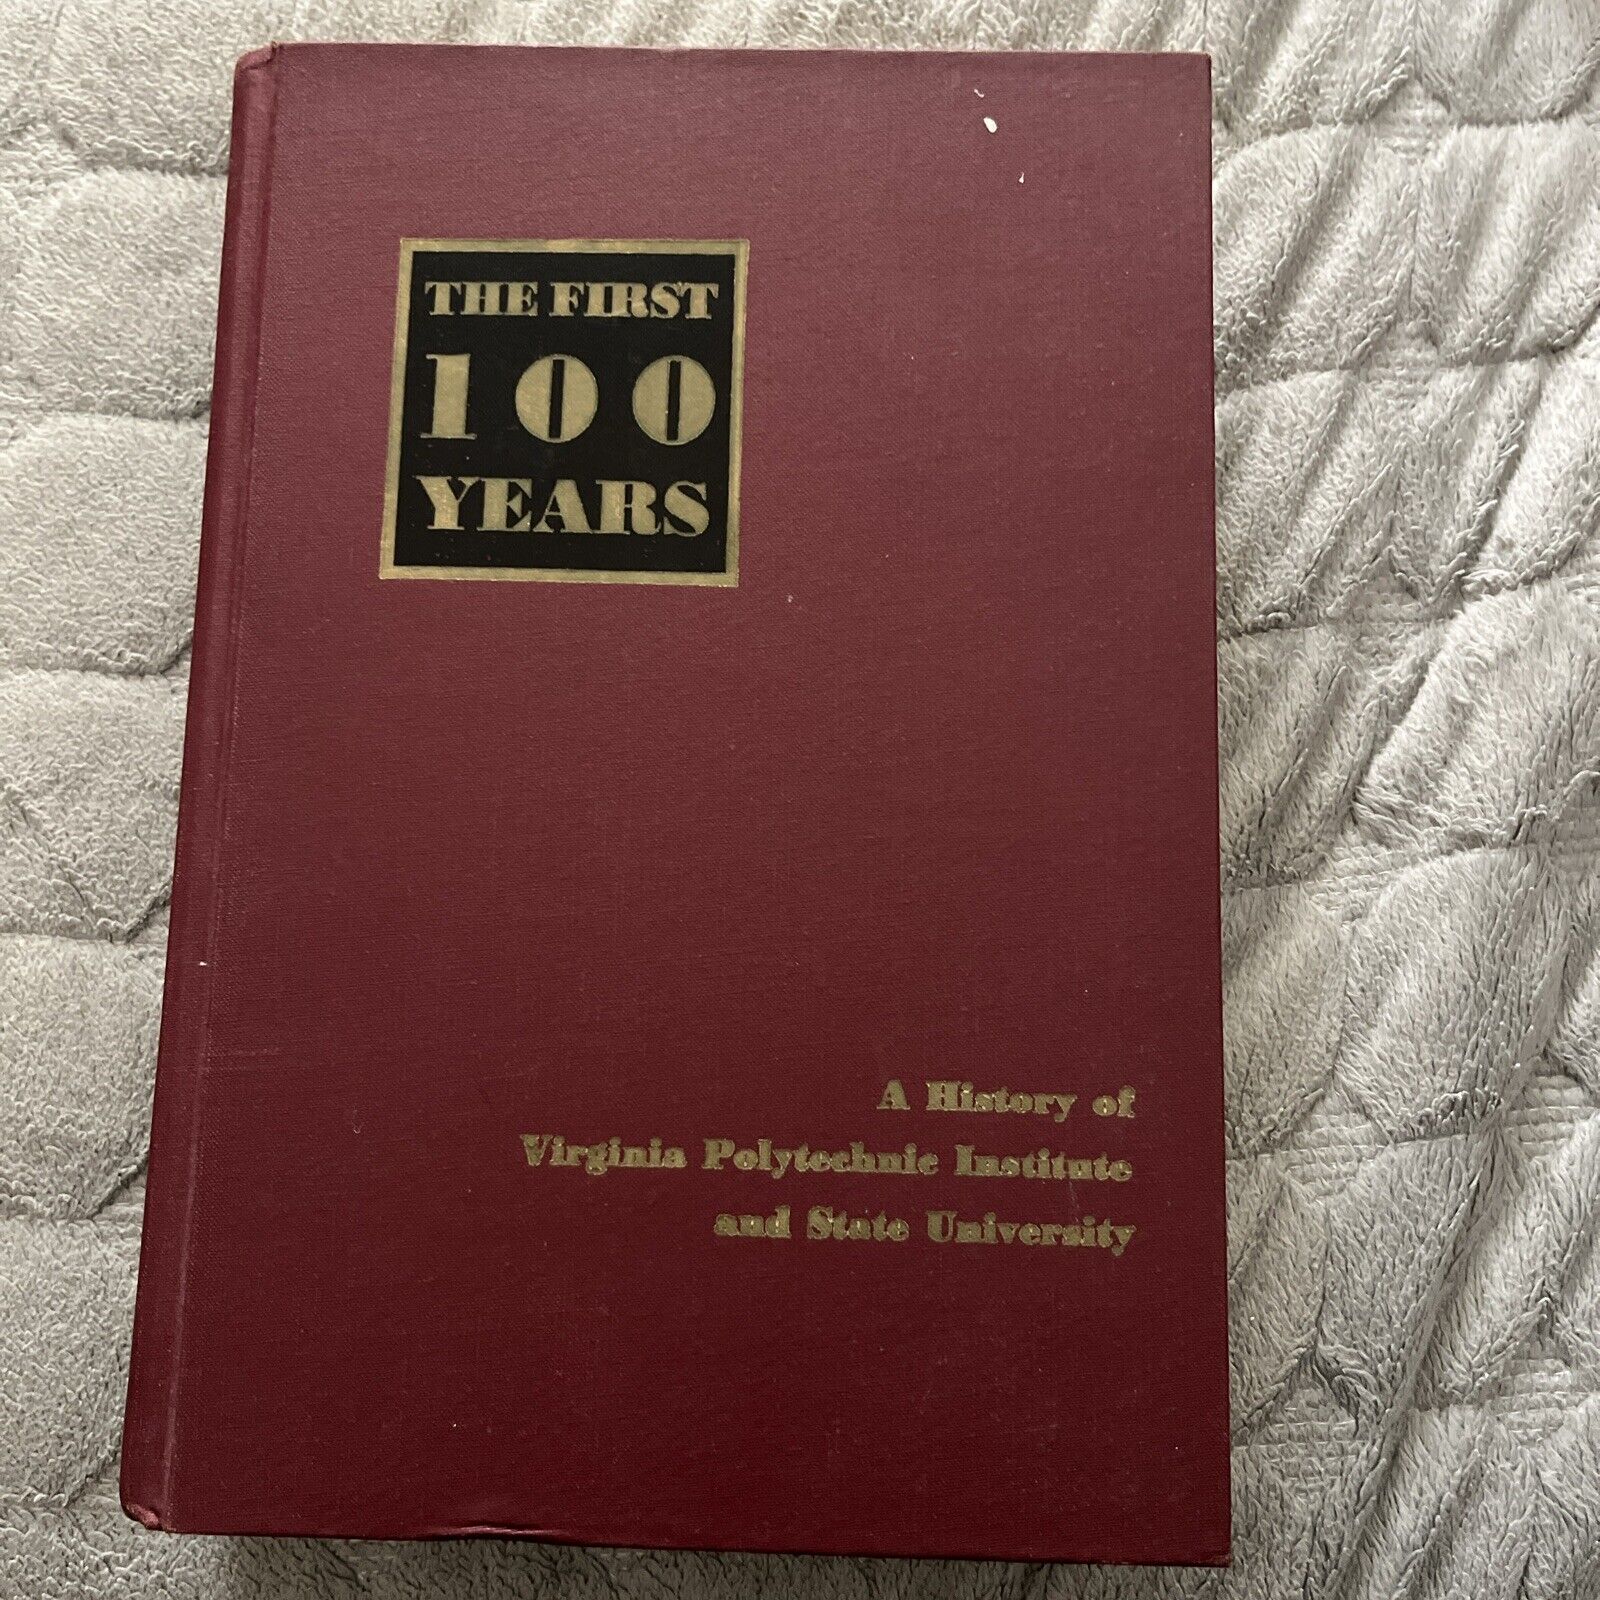 The First 100 Years: A History of Virginia Polytechnic Institute & State Univ.